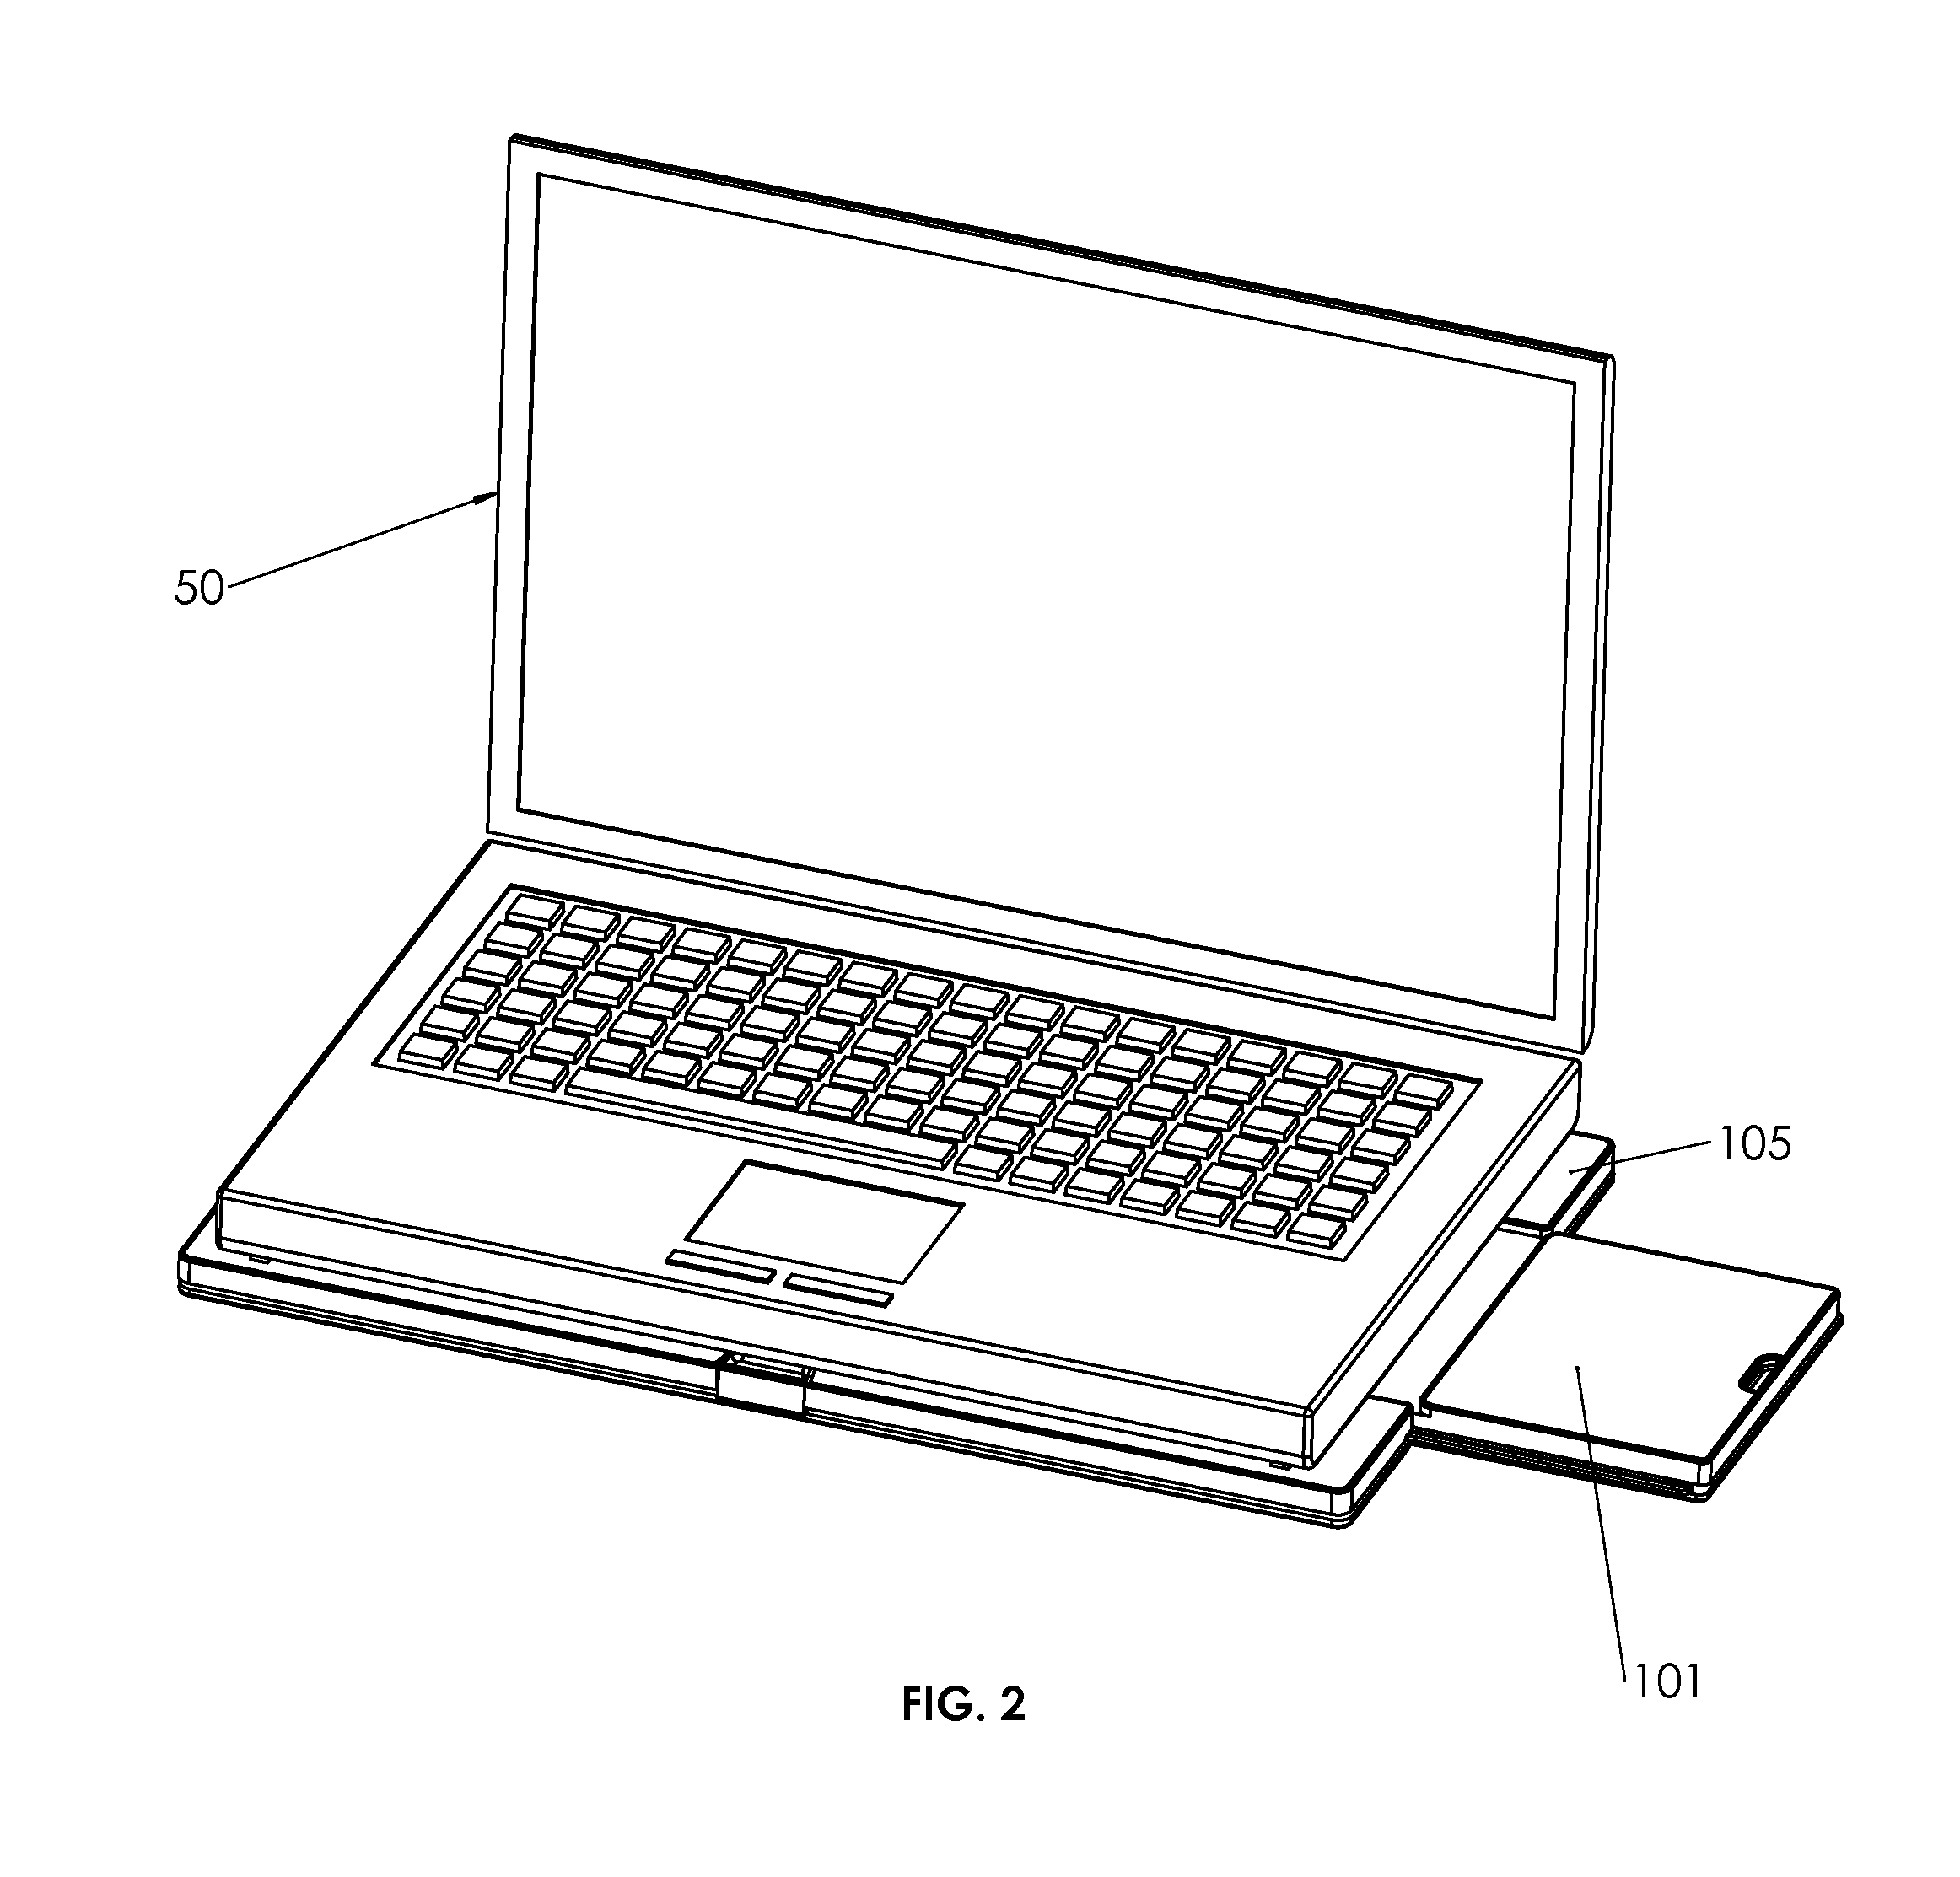 Vibration cancelling platform for use with laptops or table computers used in moving vehicles